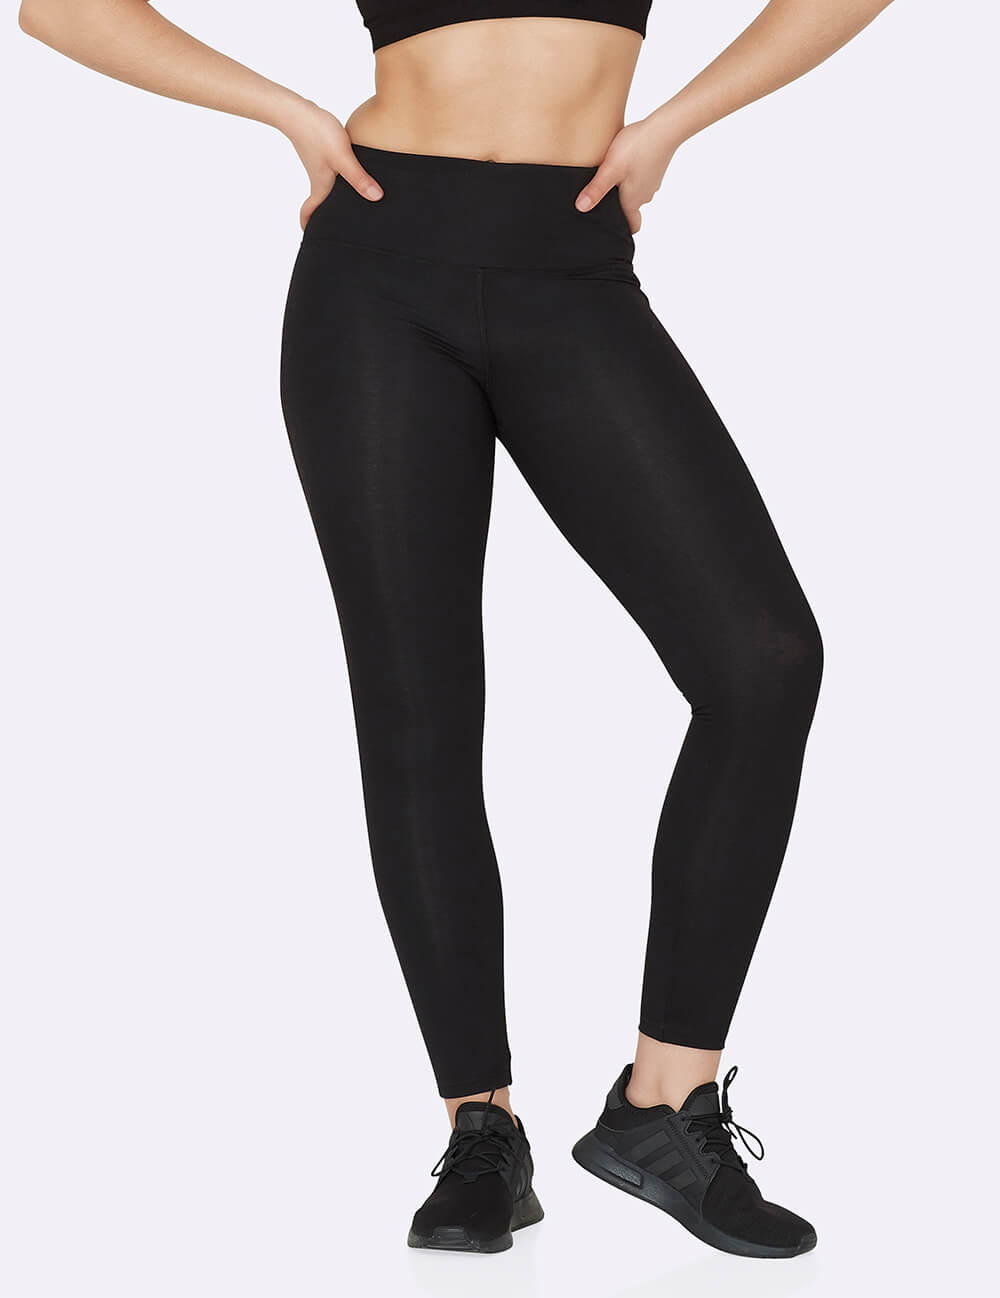 Boody Active High Waist Full Legging with Pockets - The Apple Tree